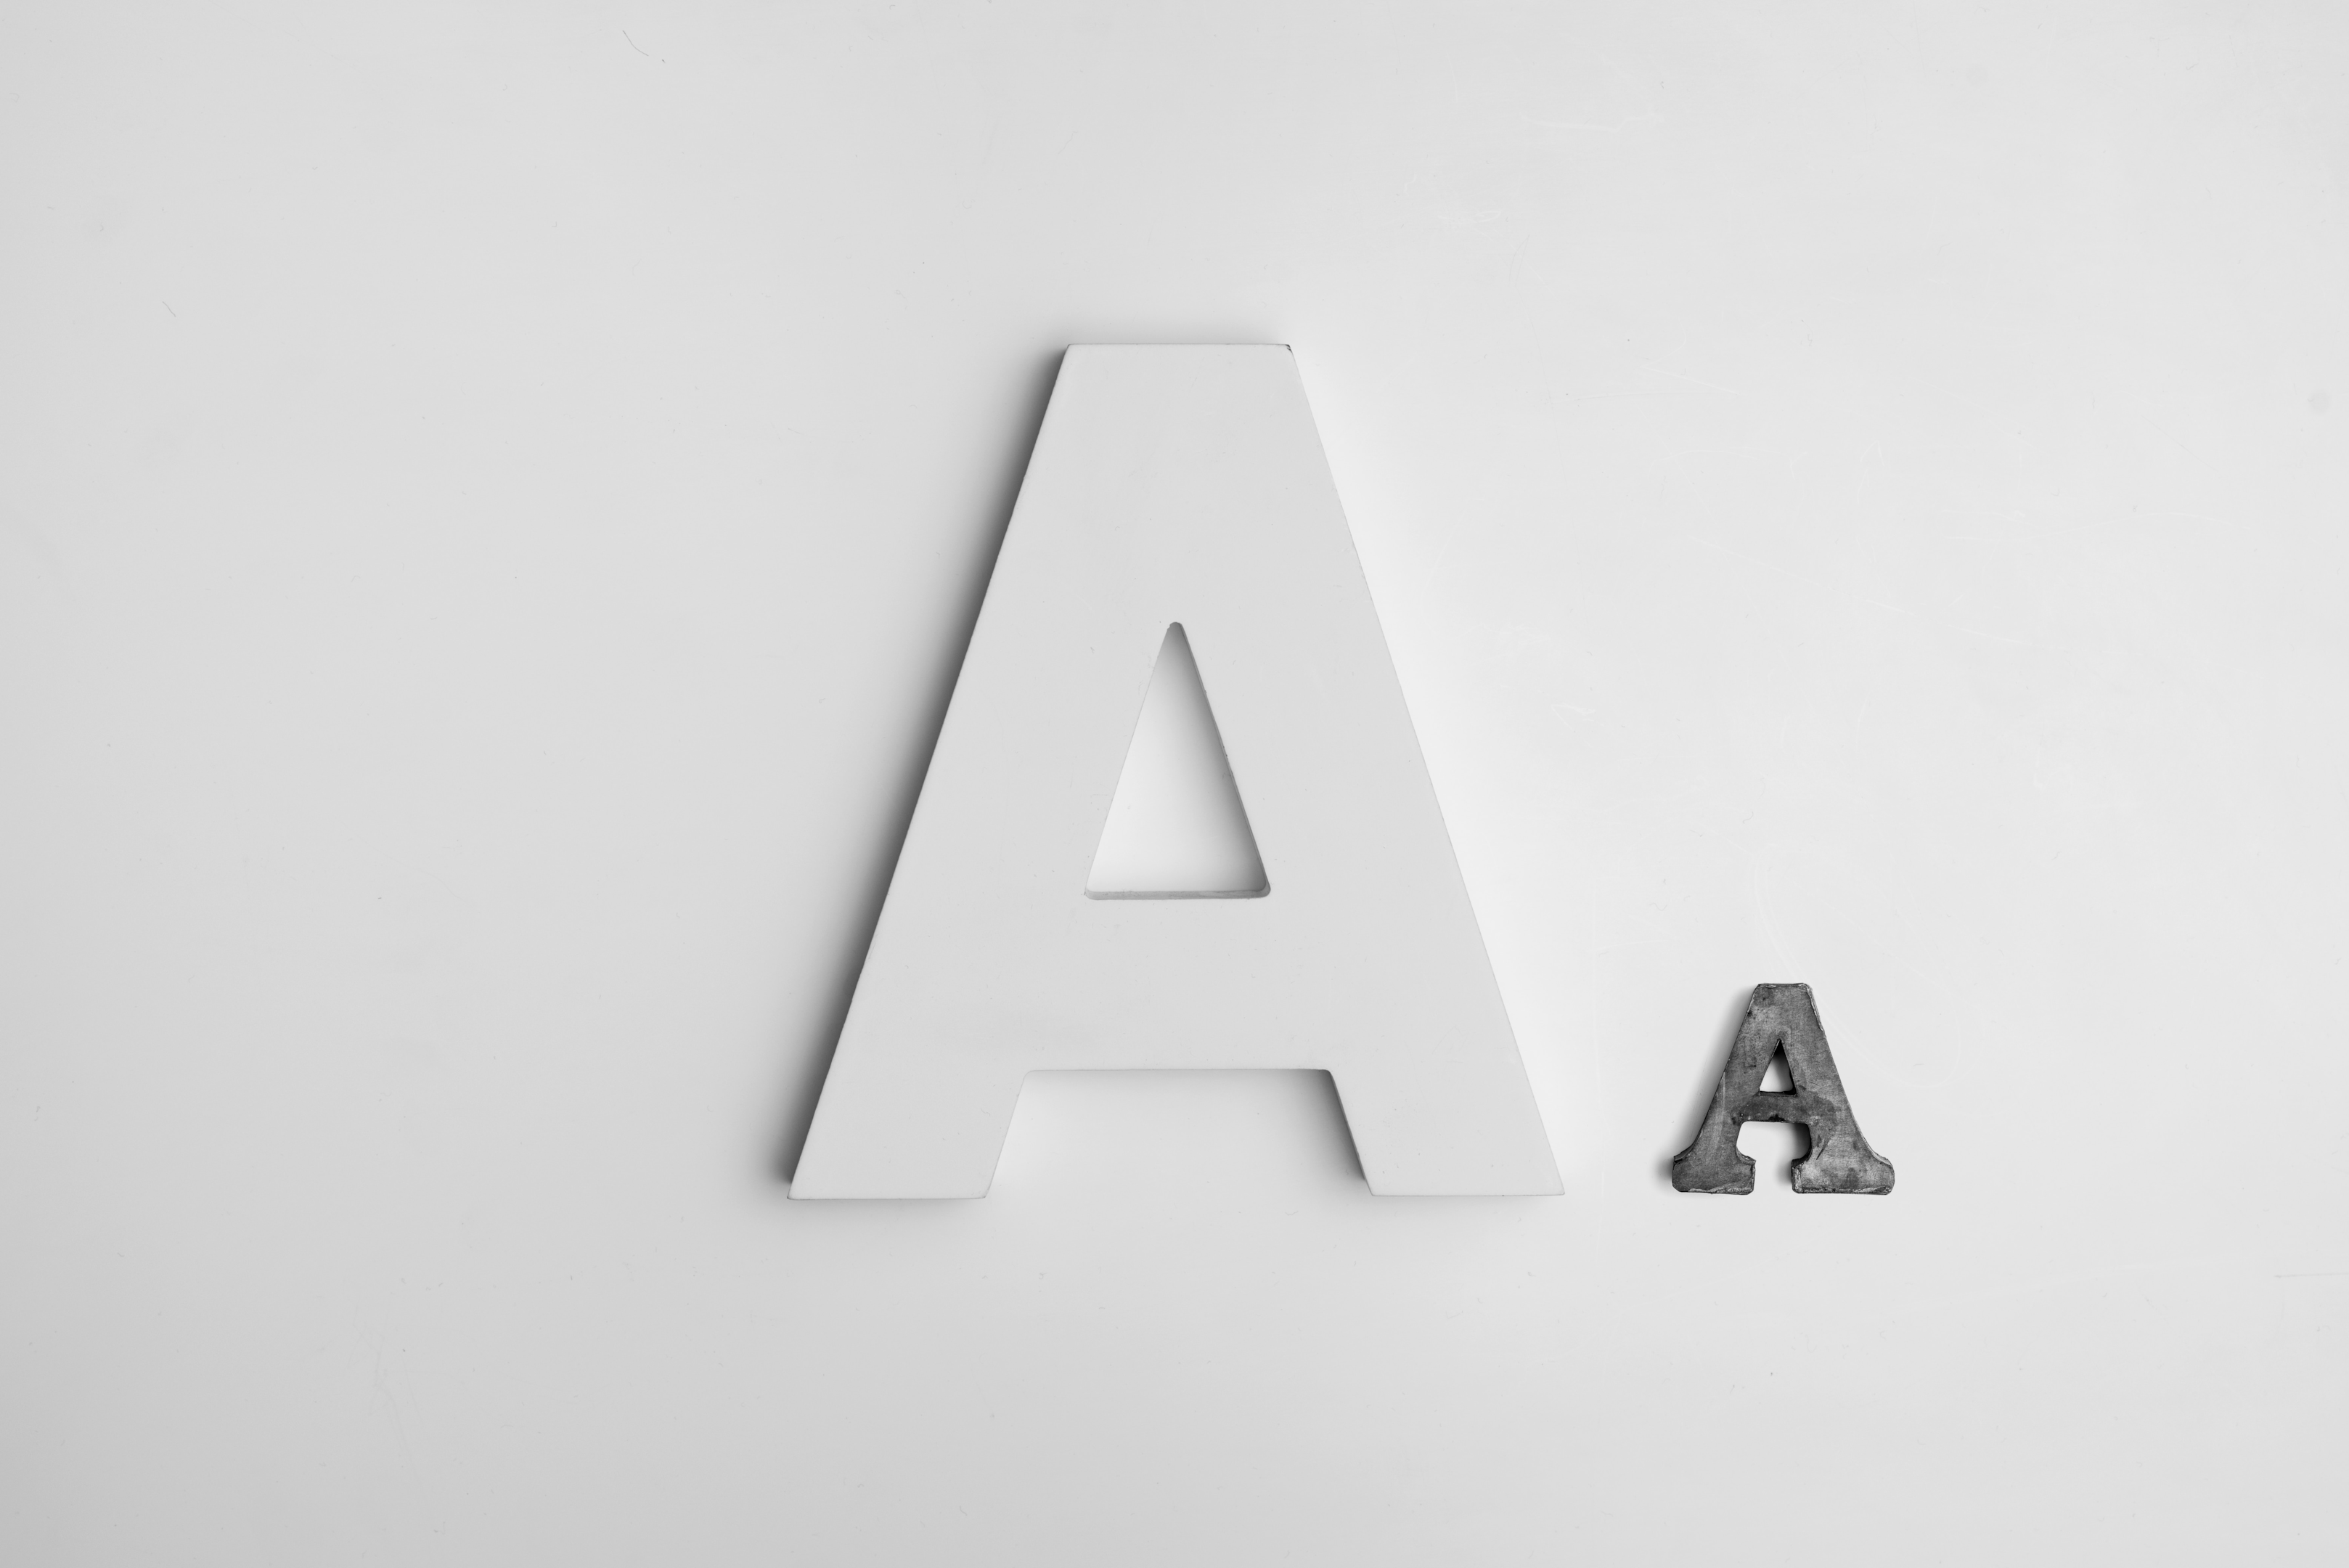 A typeface on white background